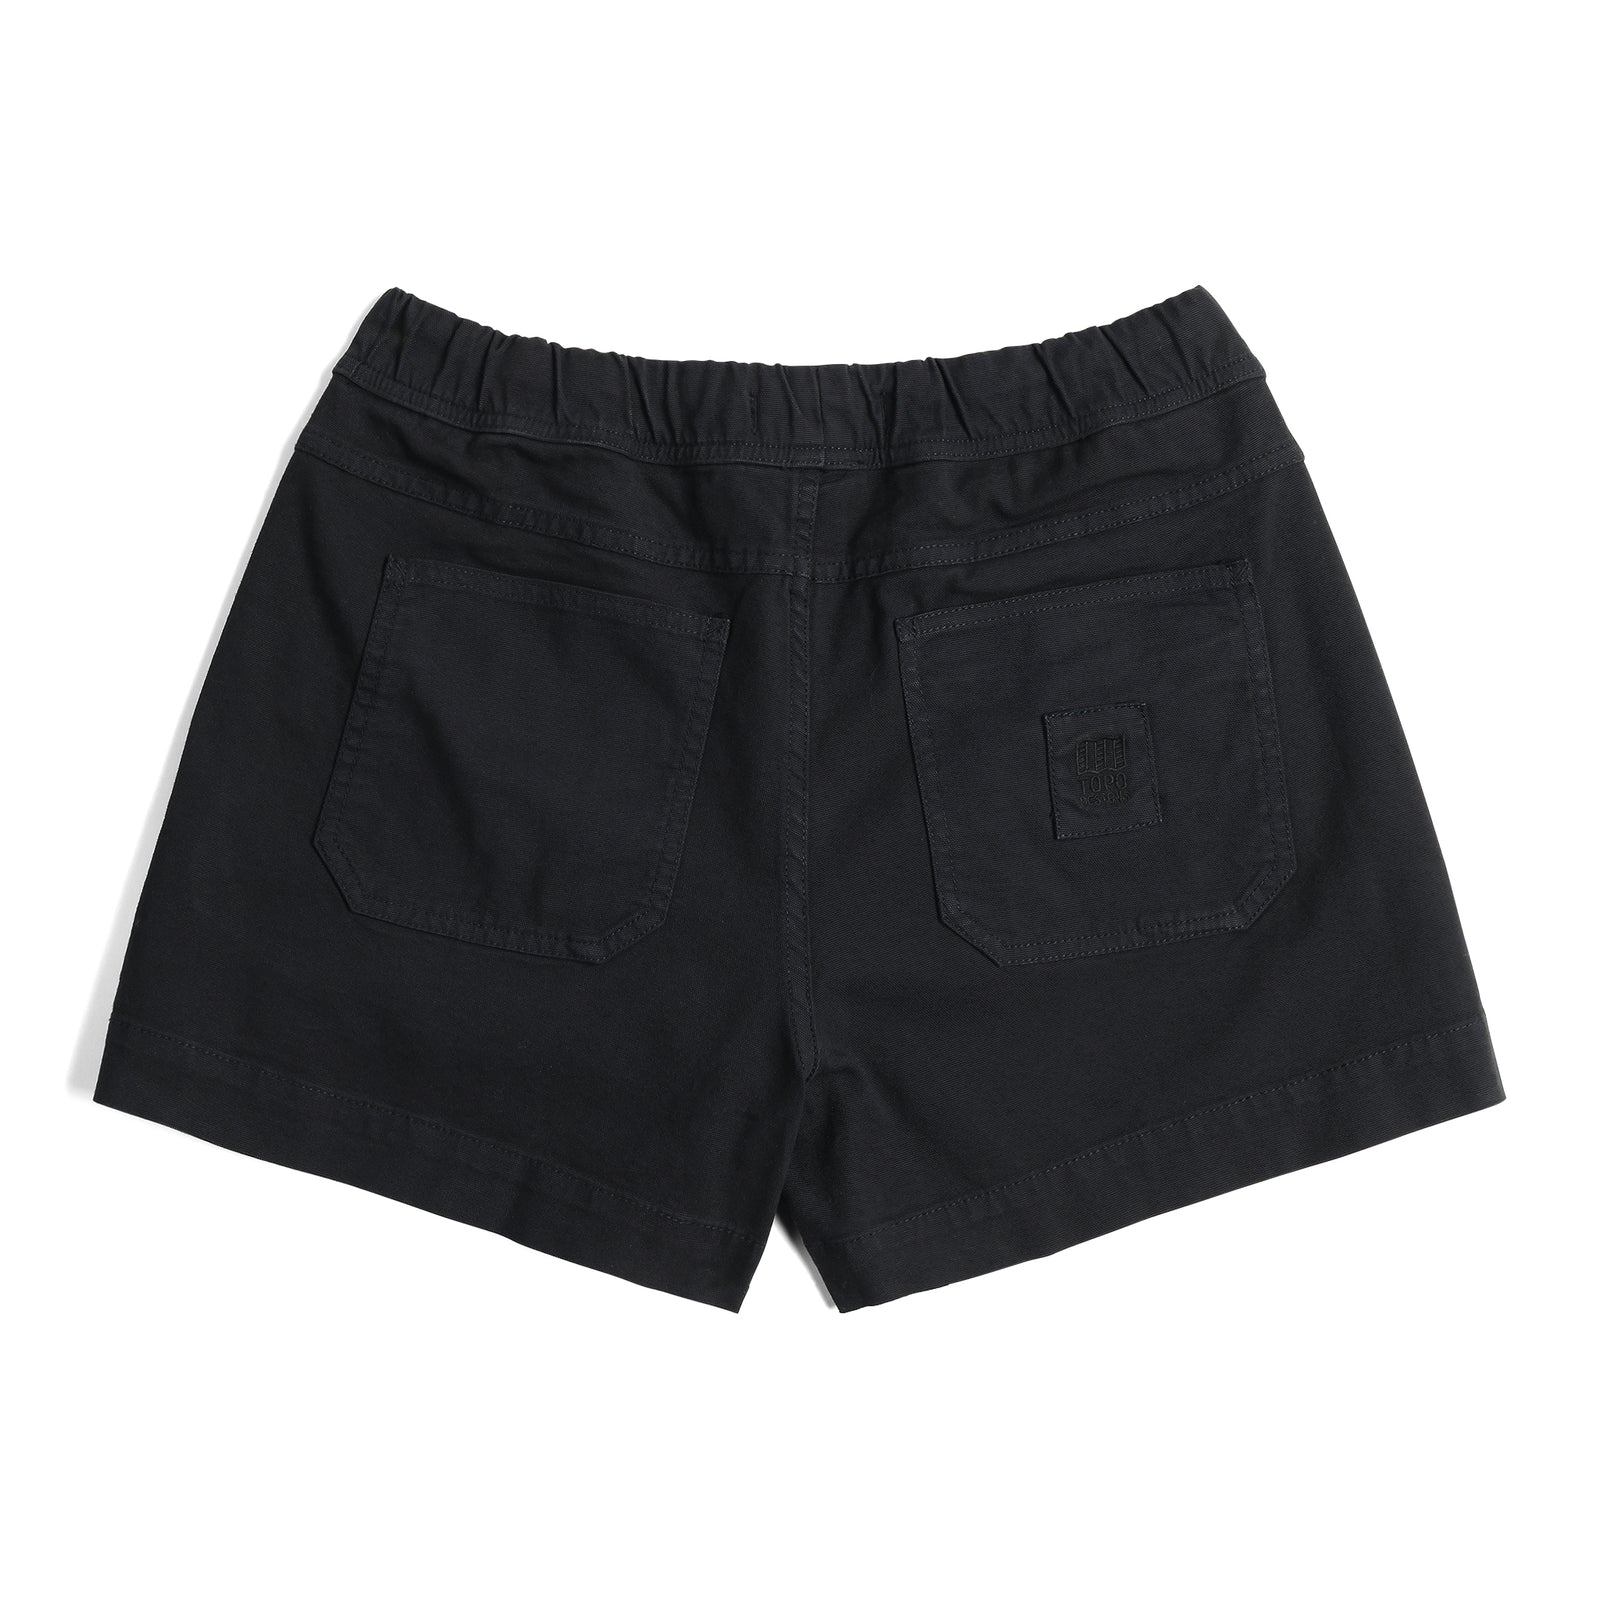 Back View of Topo Designs Dirt Shorts - Women's in "Black"